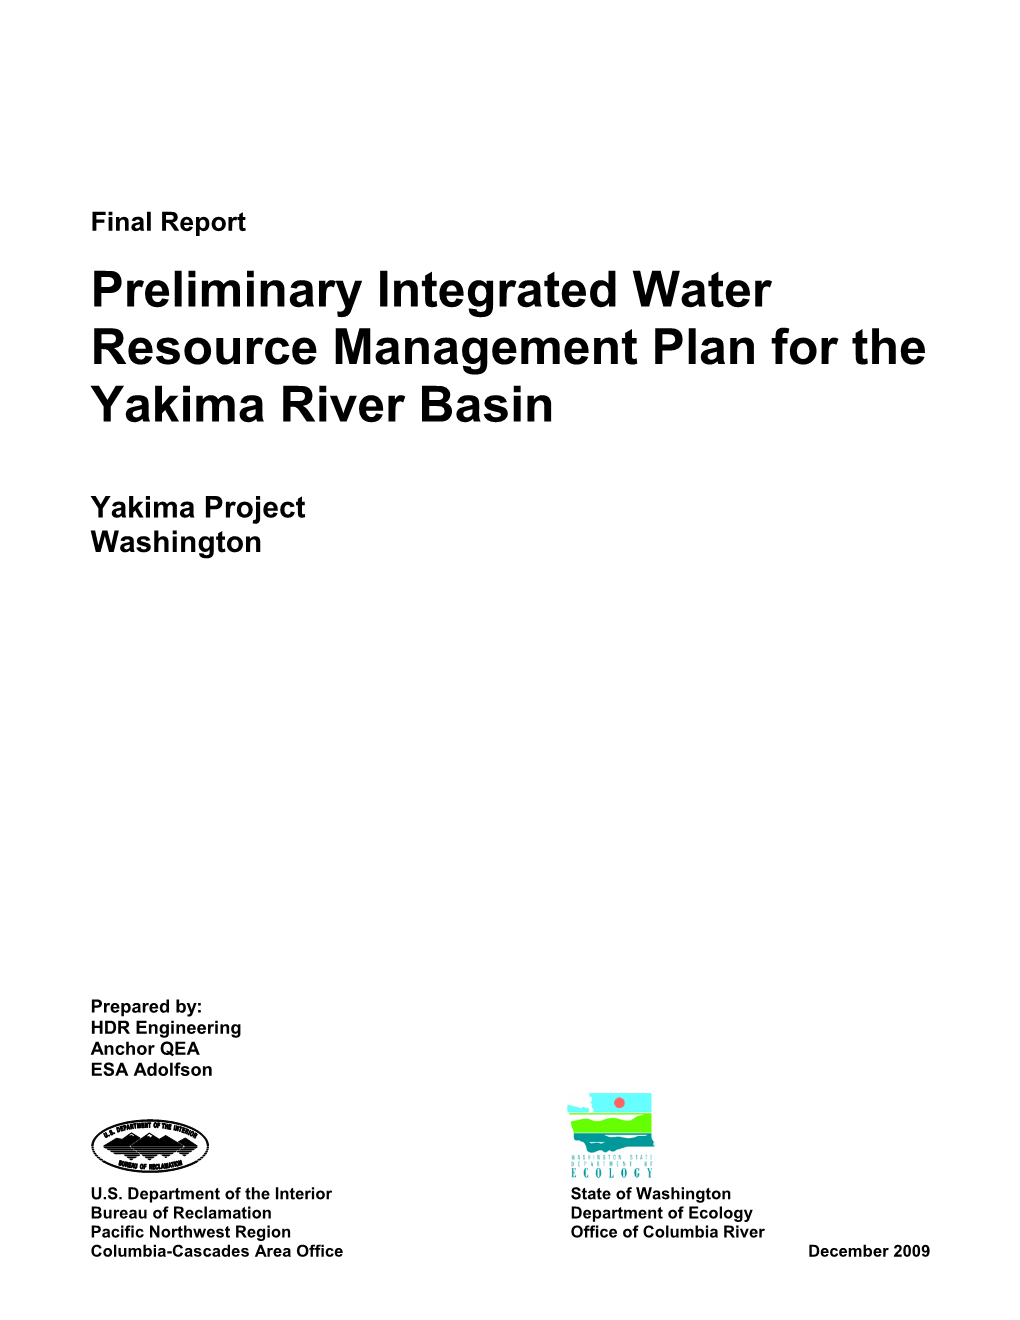 FINAL: Preliminary Integrated Water Resource Management Plan for The